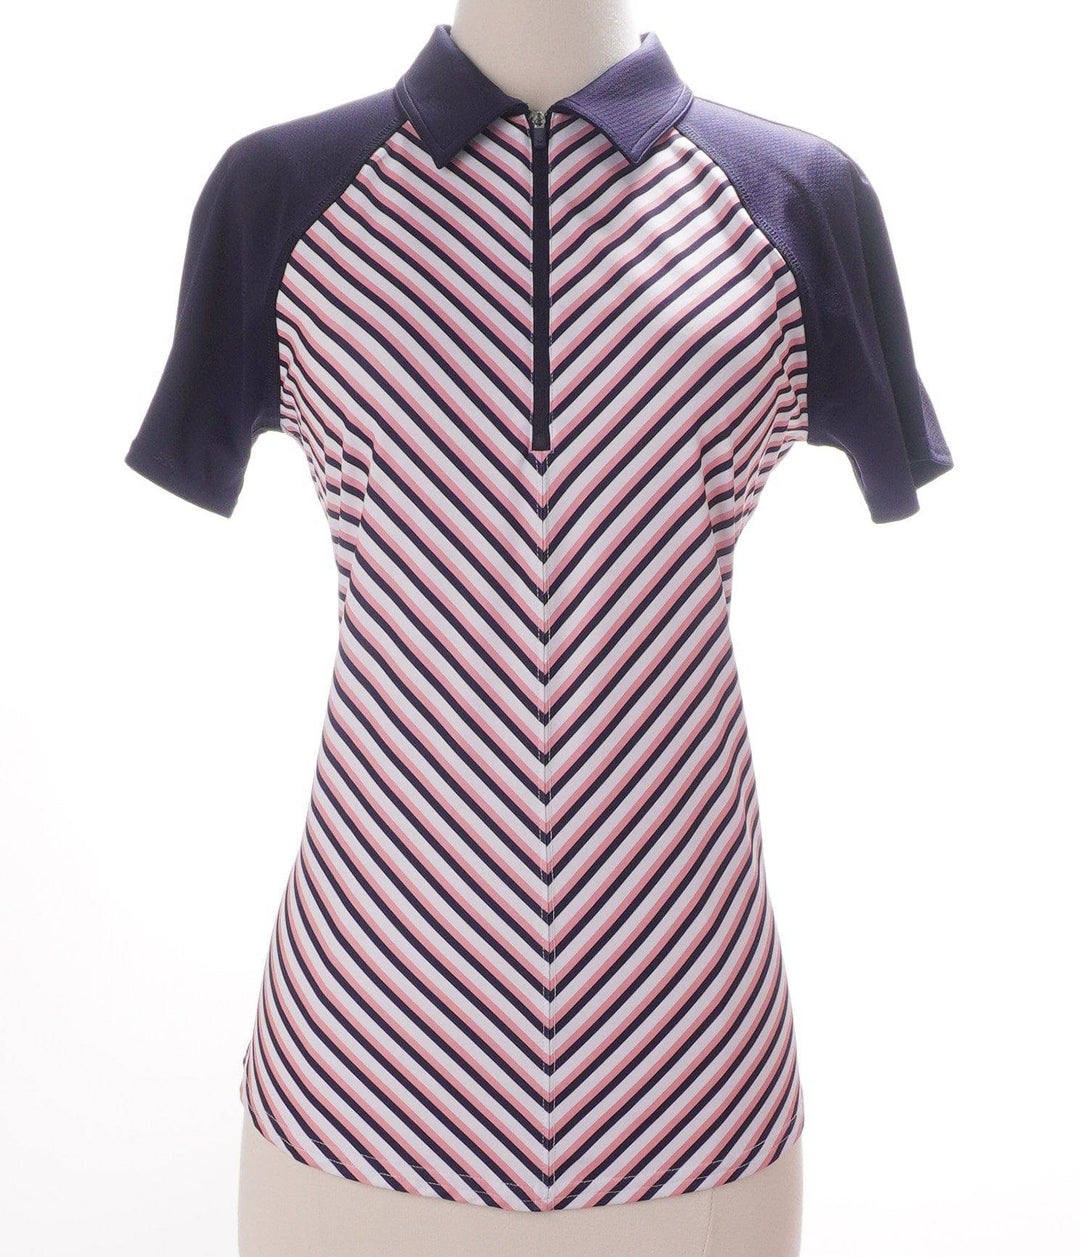 Skorzie Small / Navy Jofit Short Sleeve Top Exclusive Product -  Navy / Pink Stripe - Size Small Apparel & Accessories